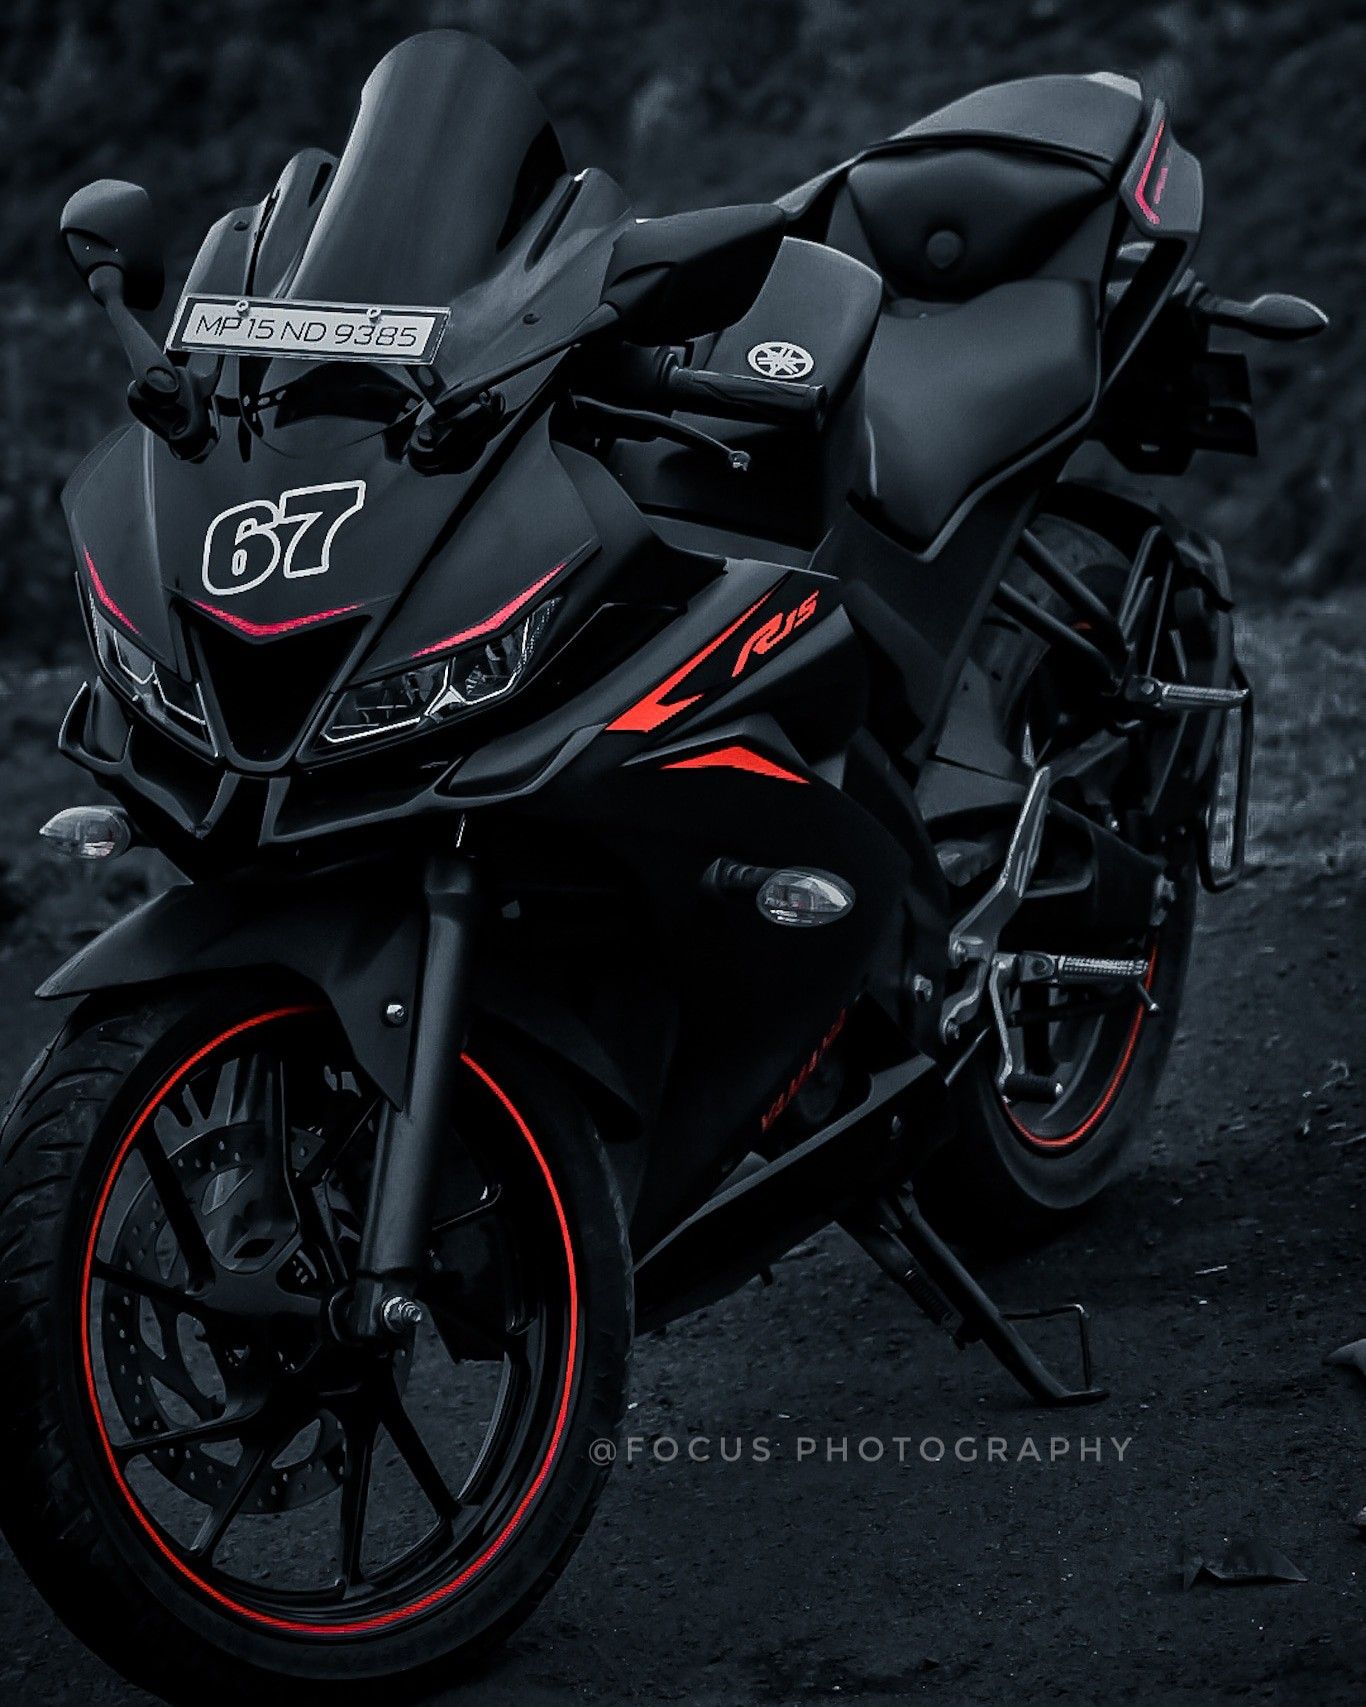 Yamaha yzf R15 v3 ..black and red ..